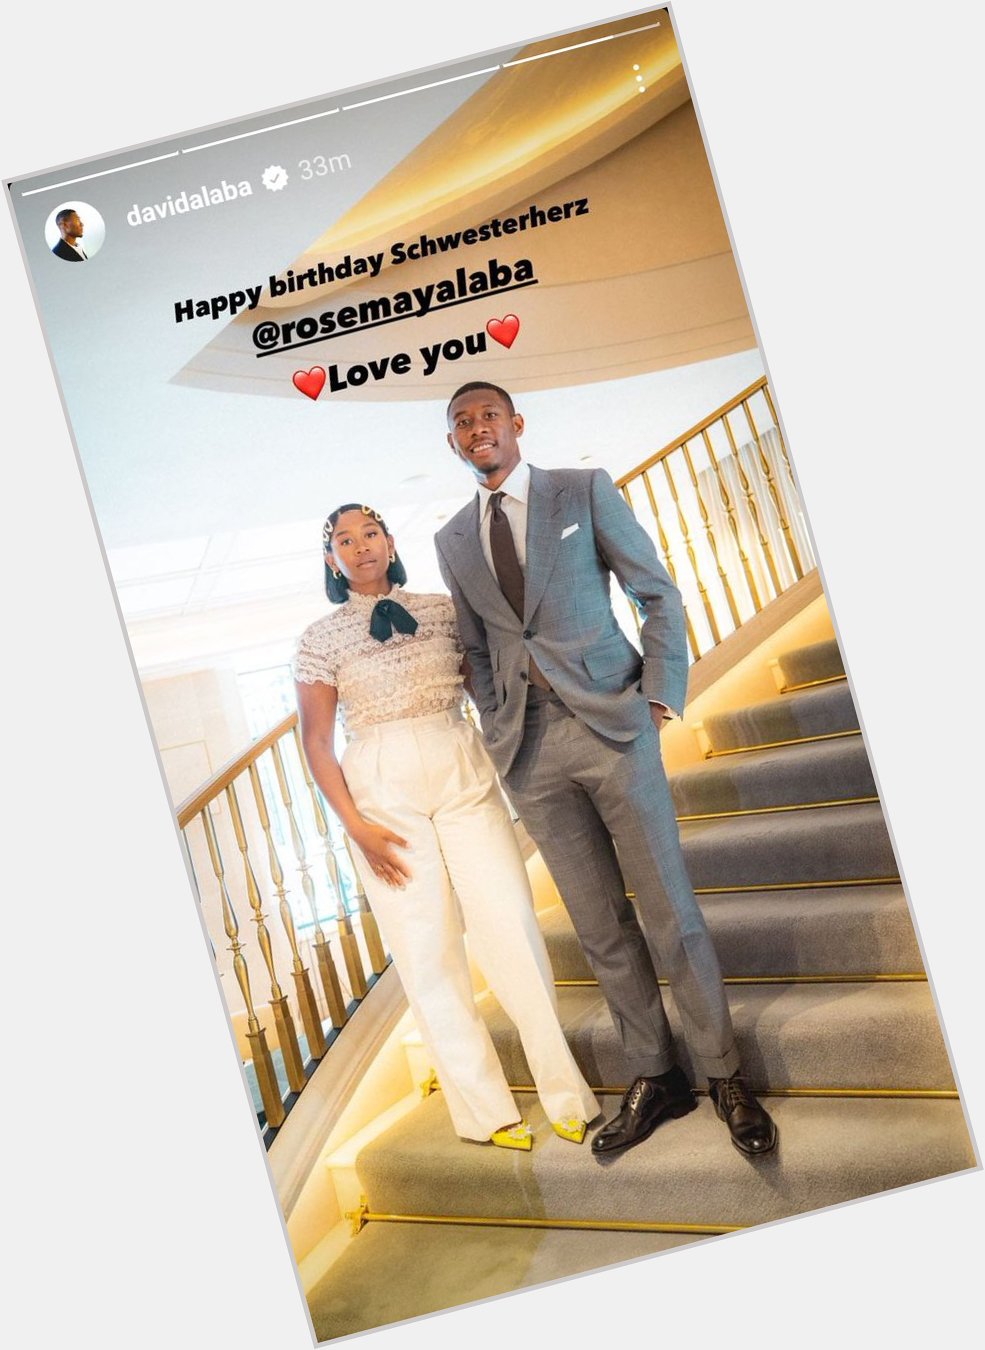   on IG wishing her sister a happy birthday.

Love you much 